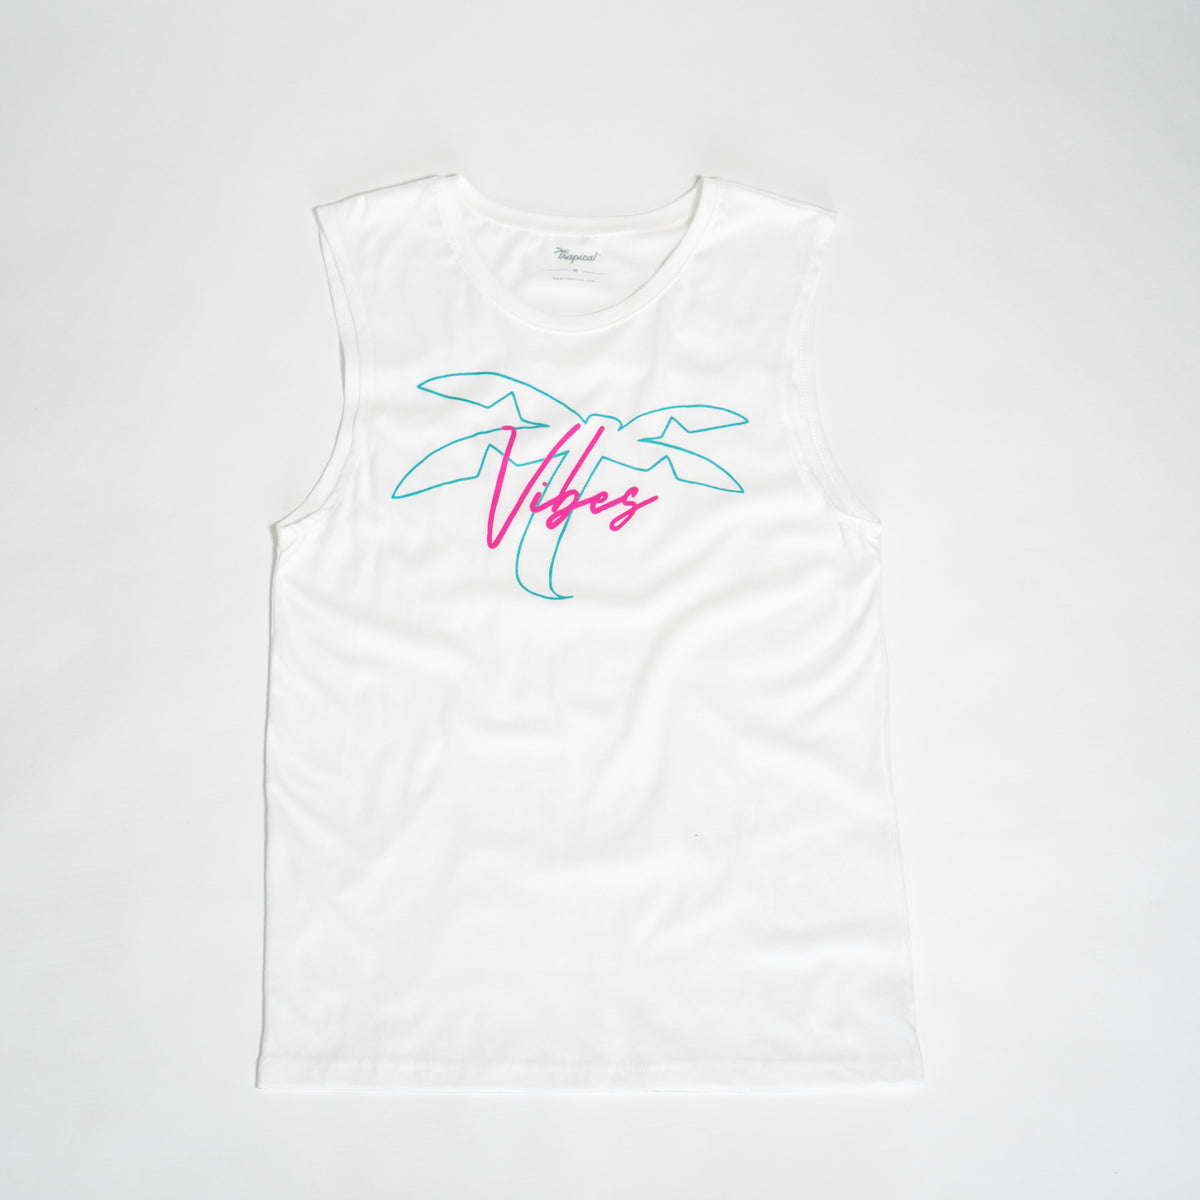 Men’s T Vibes white - Trapical